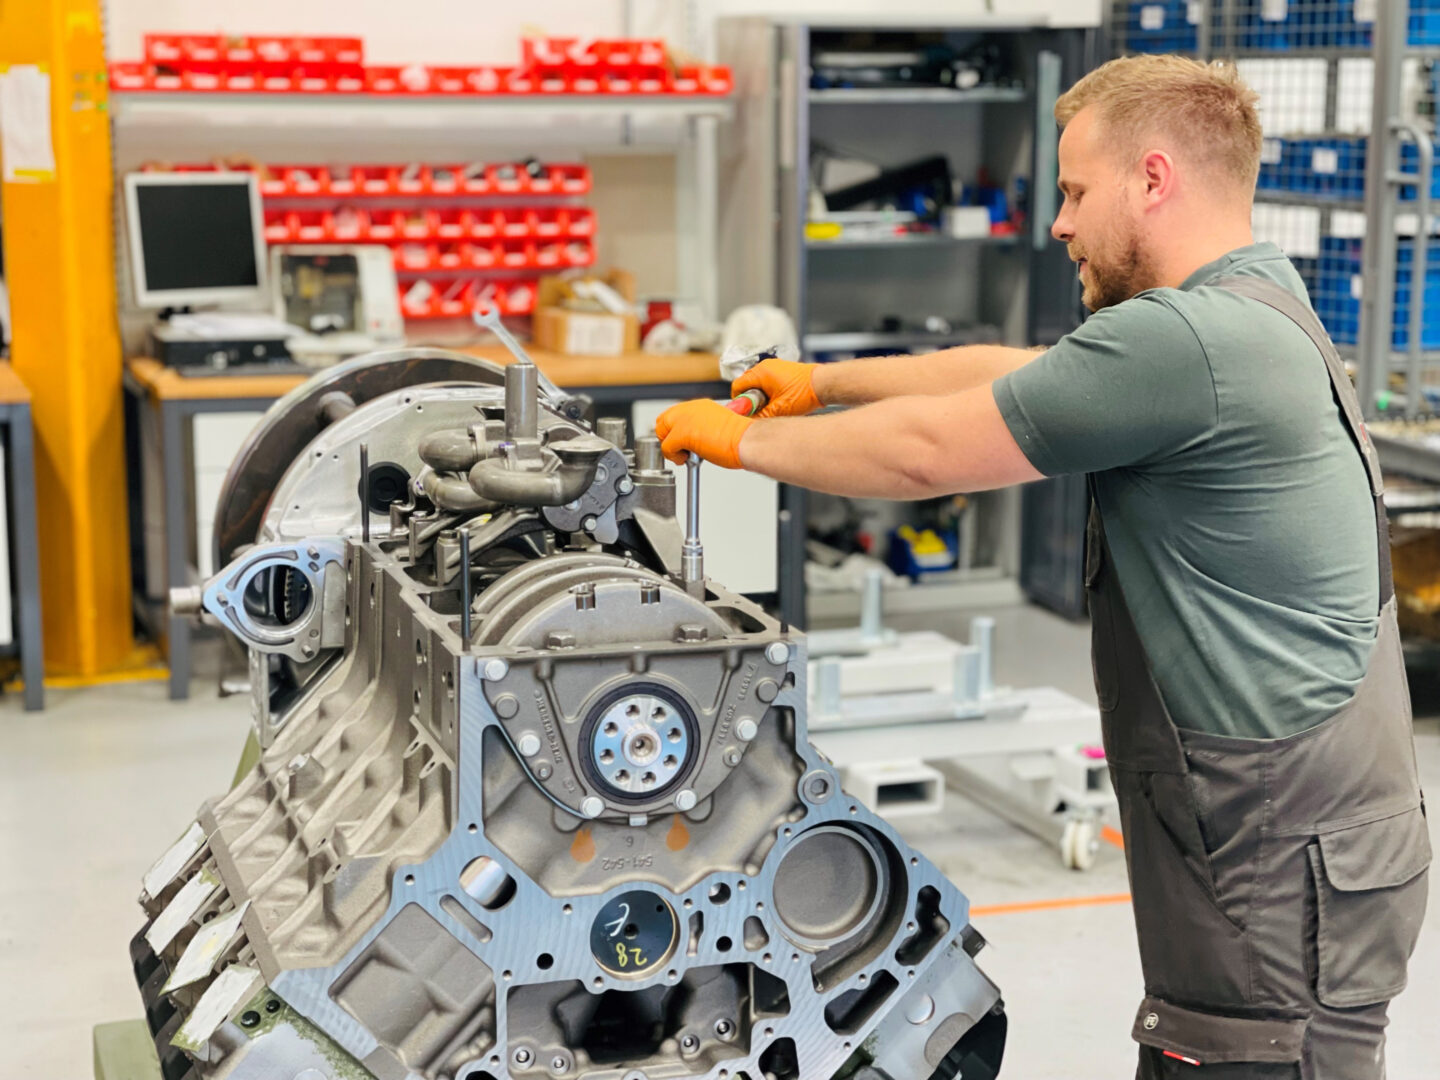 The facility for the assembly and load testing of these engines, which will power the Boxer vehicles, is now fully operational at the plant in East Grinstead, in West Sussex.